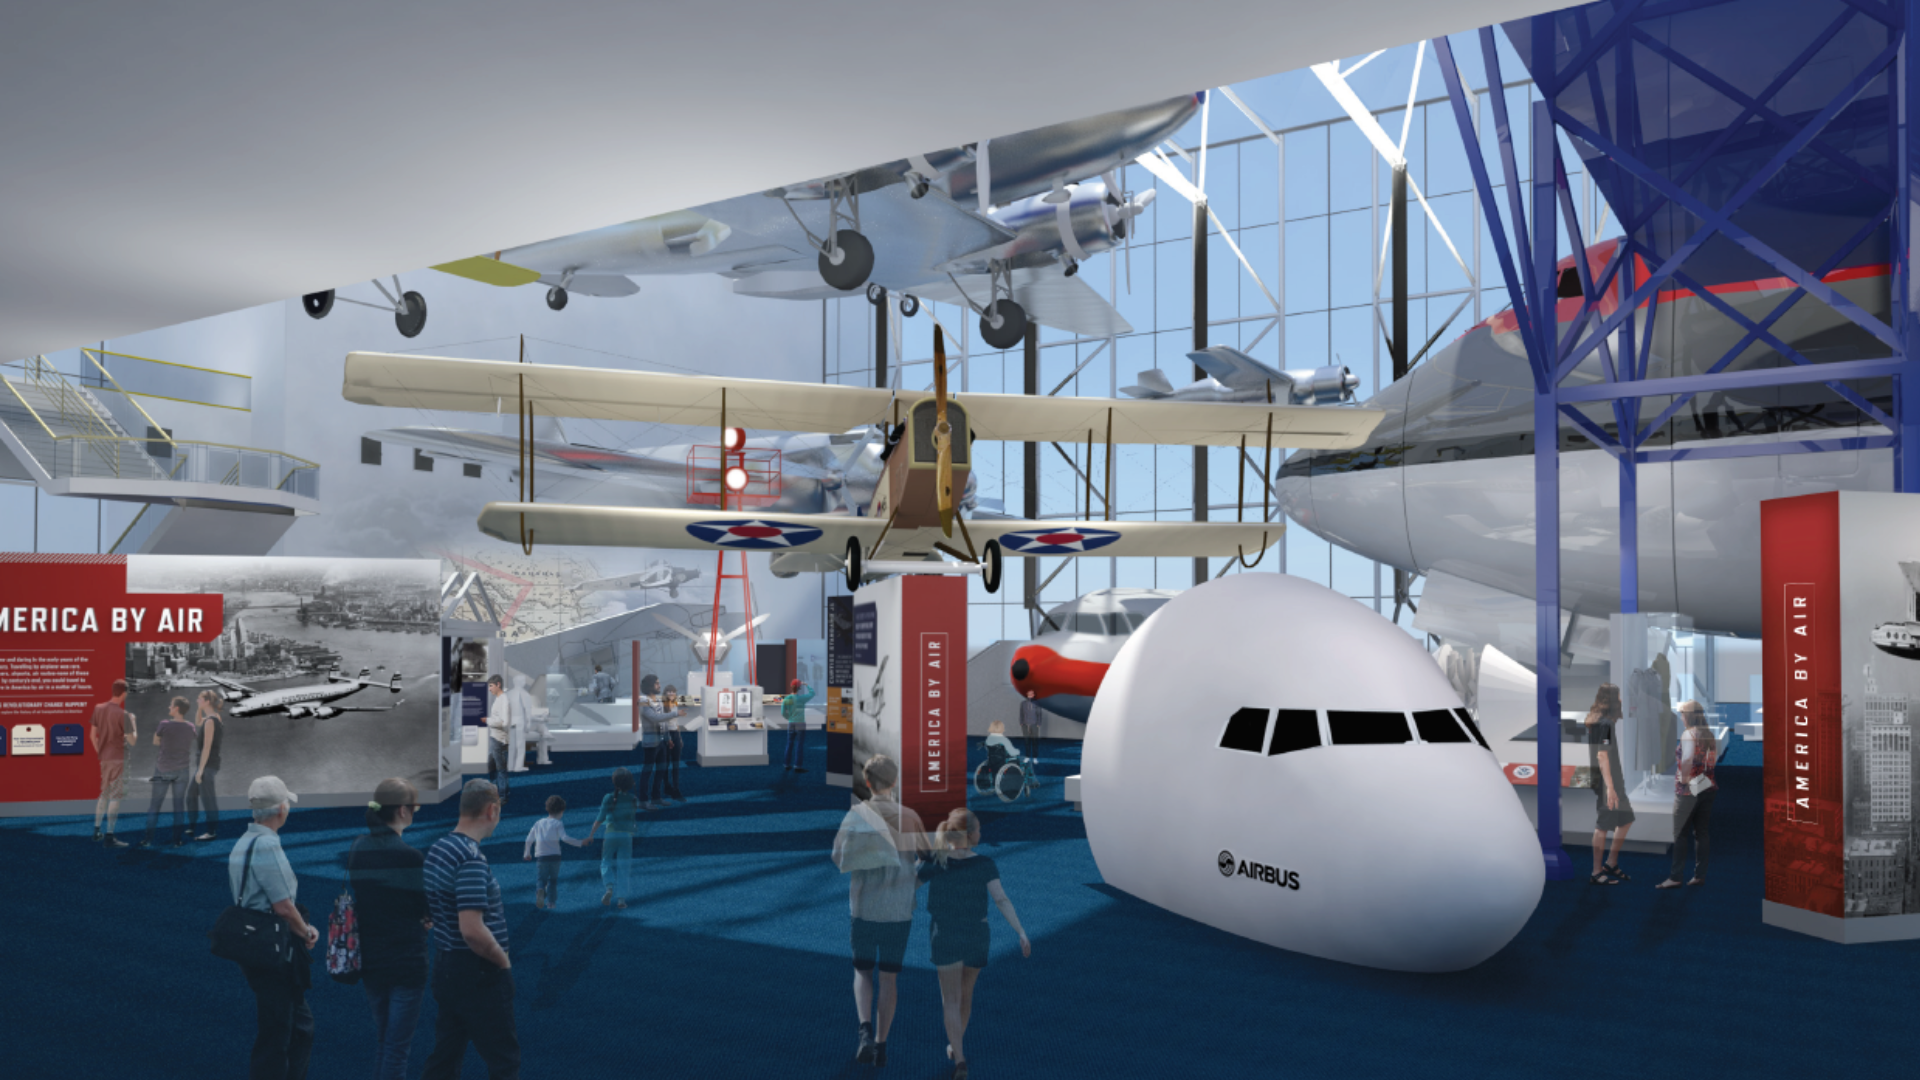 Families and field trips visiting the country’s most popular museum might notice something… missing. About one half of the Smithsonian’s National Air and Space Museum is now closed for a major construction project while the rest of the museum remains open.